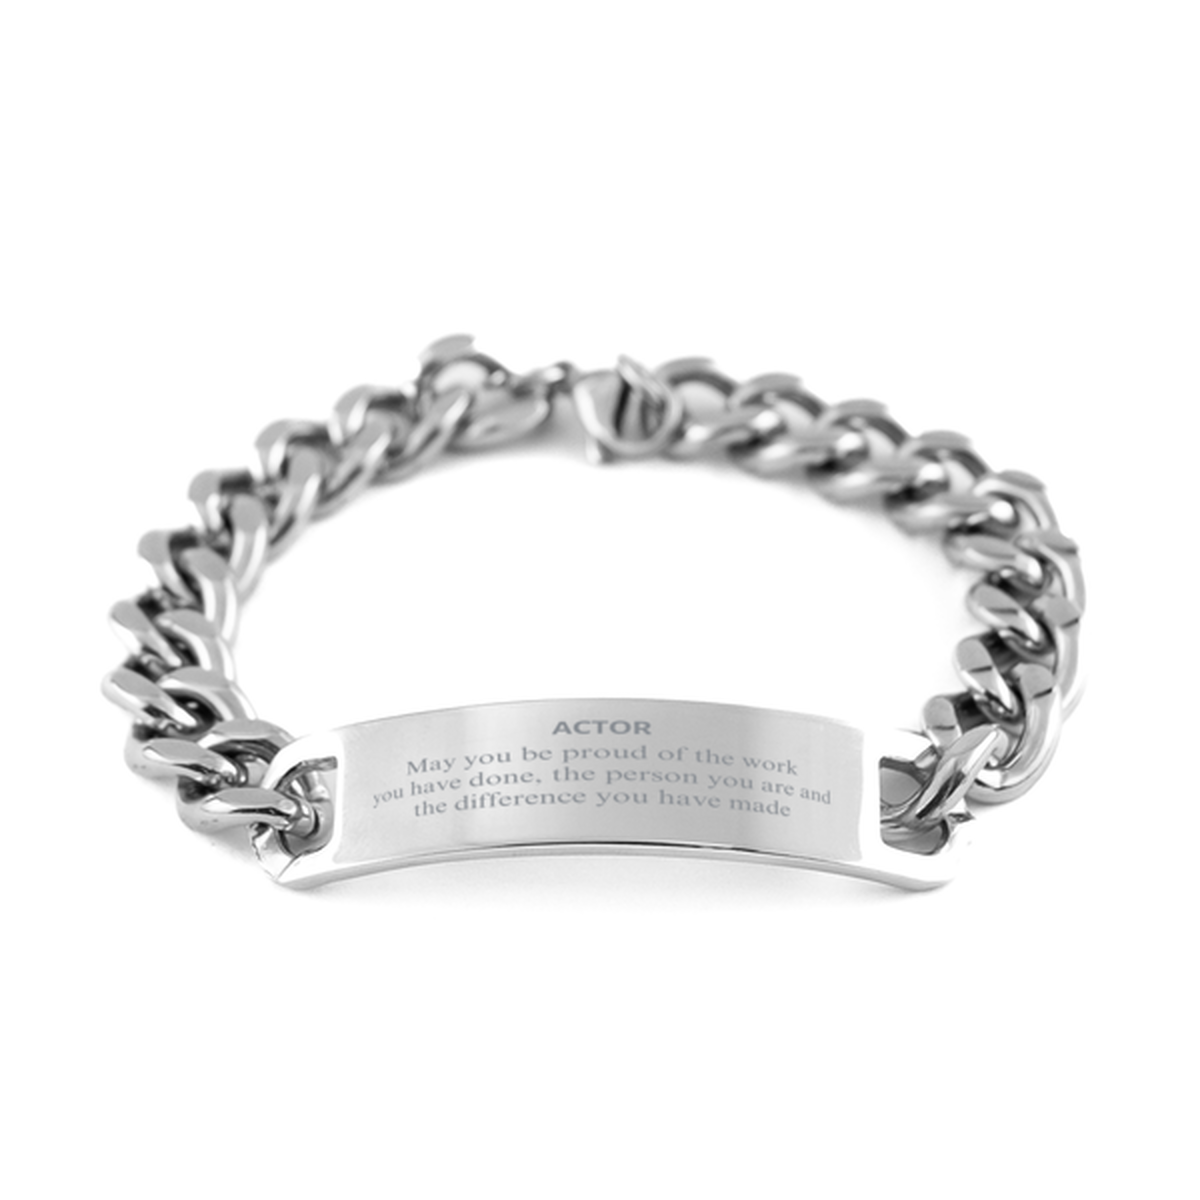 Actor May you be proud of the work you have done, Retirement Actor Cuban Chain Stainless Steel Bracelet for Colleague Appreciation Gifts Amazing for Actor